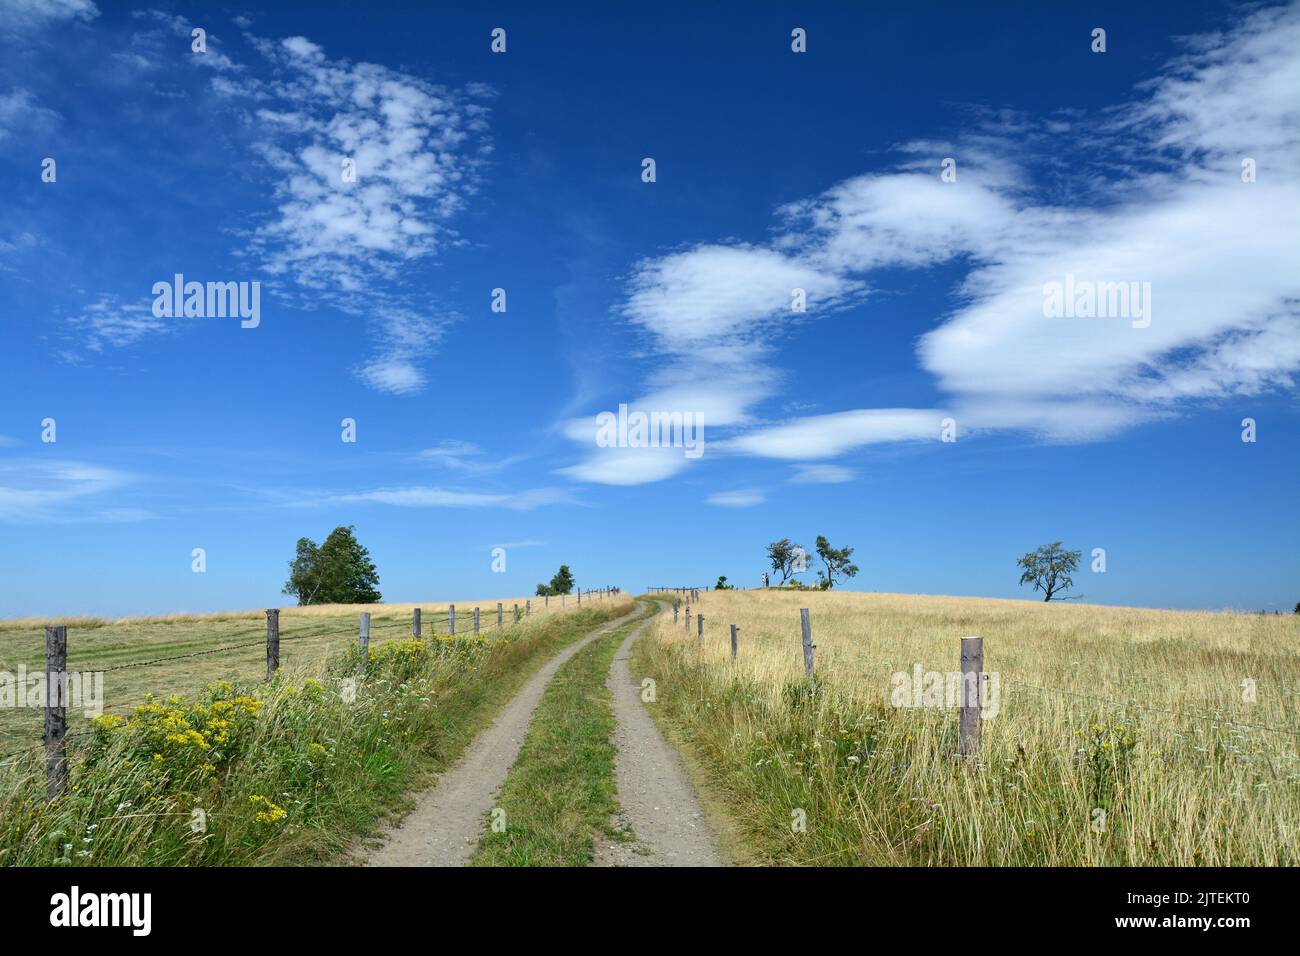 Poland, countryside in the mountains. Idyllic scenic meadow, dirt road and sky summer view. Polish village landscape. Stock Photo